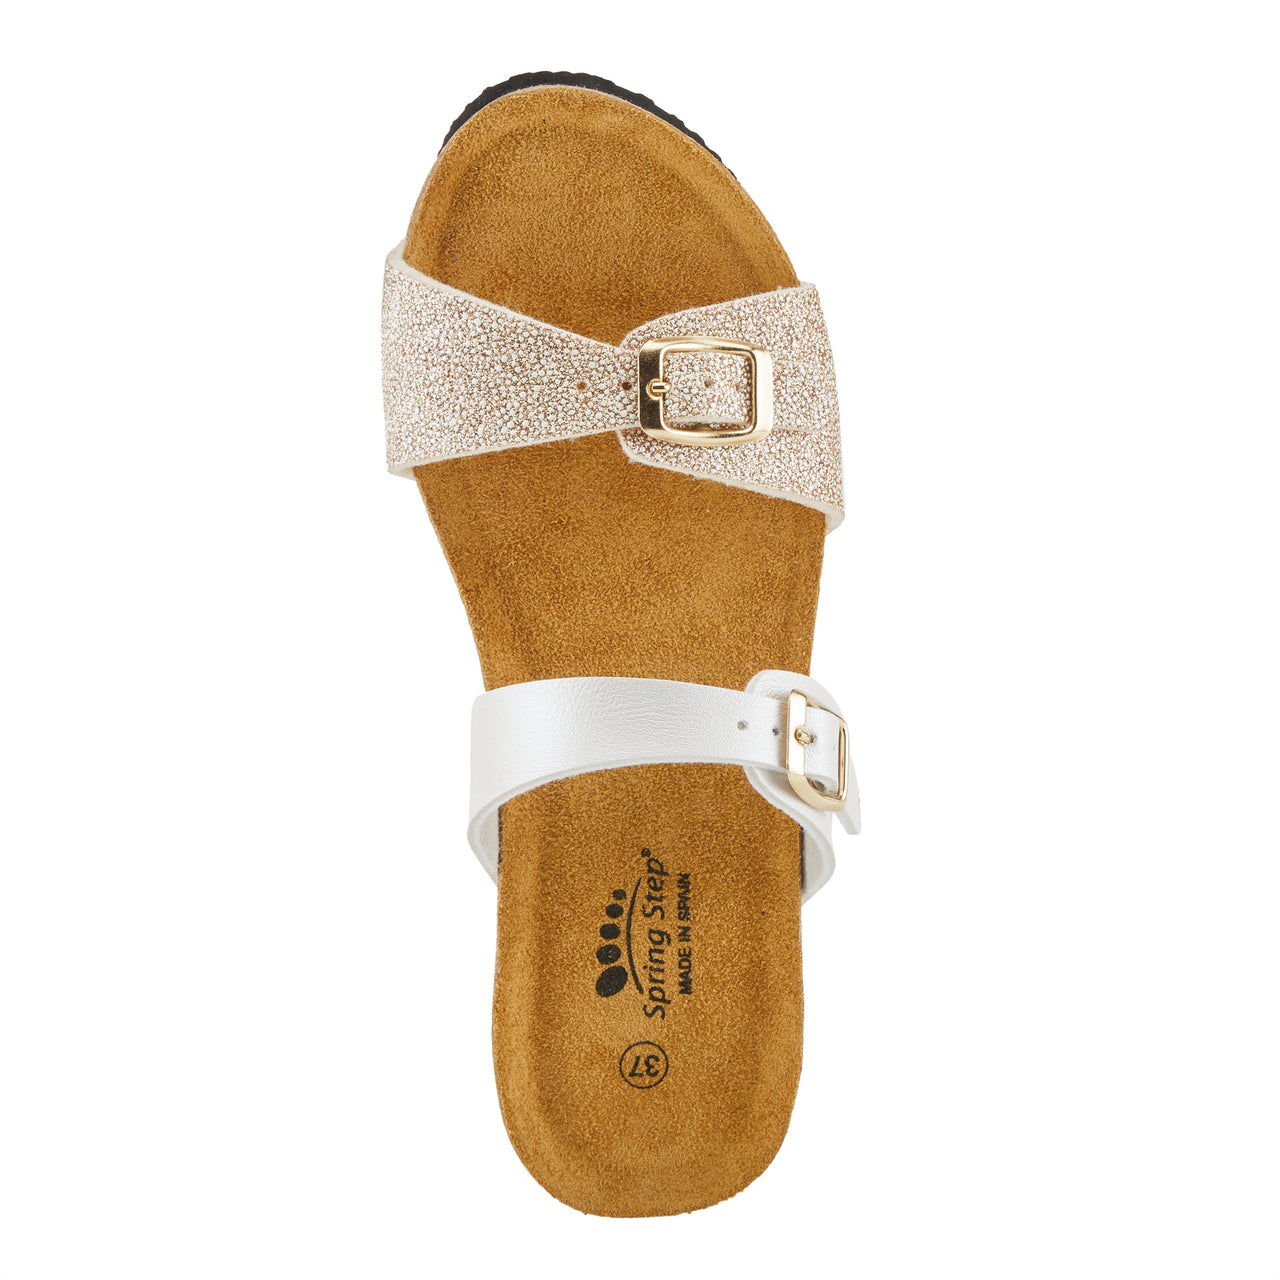 Fashionable Spring Step Bynum Sandals featuring adjustable buckle straps and sturdy rubber soles